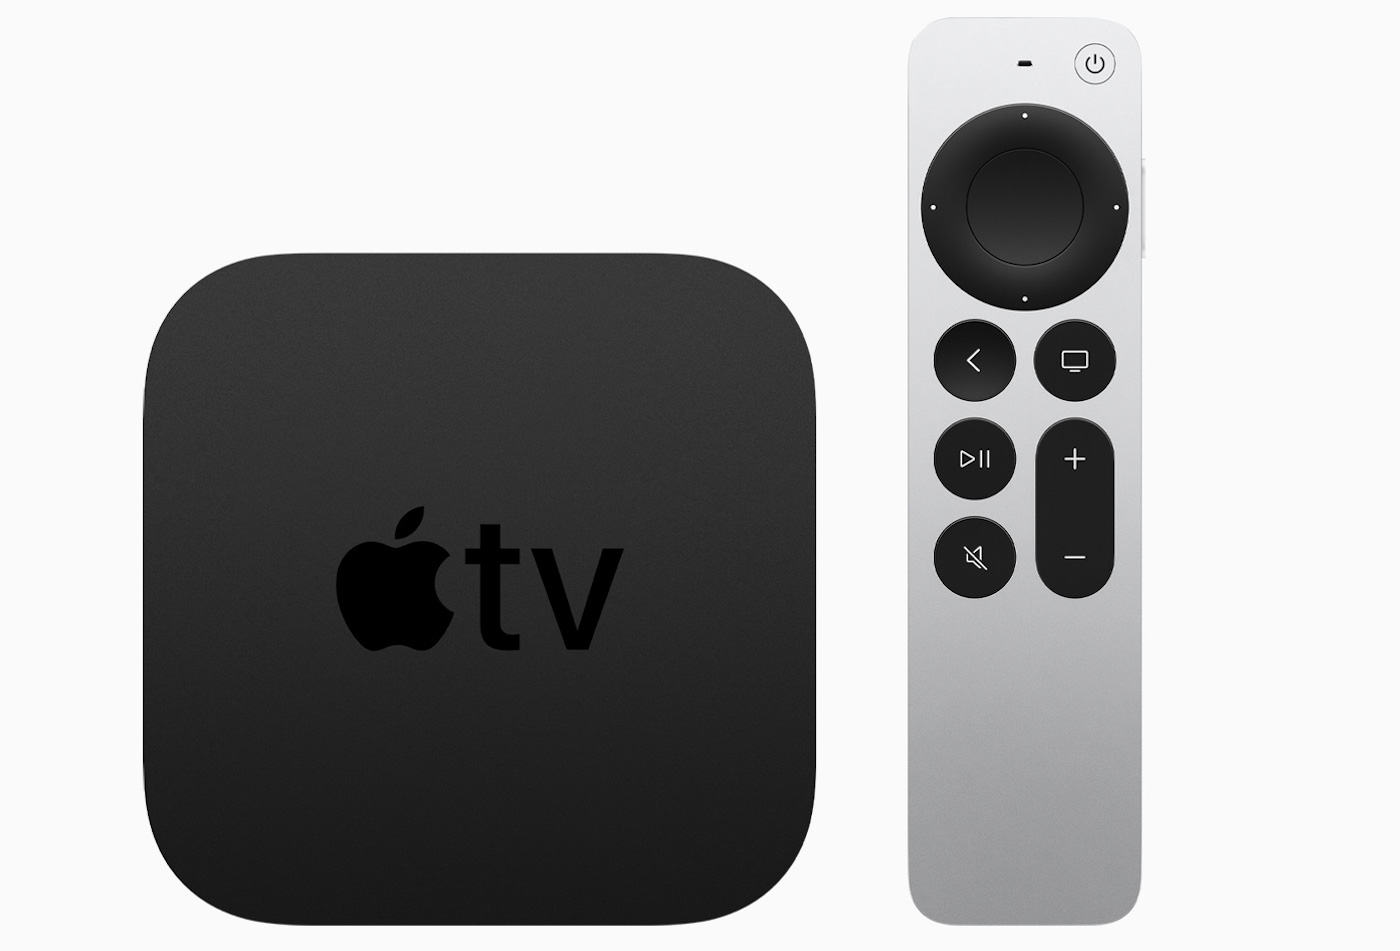 Apple TV 4K is back at Free for Freebox subscribers